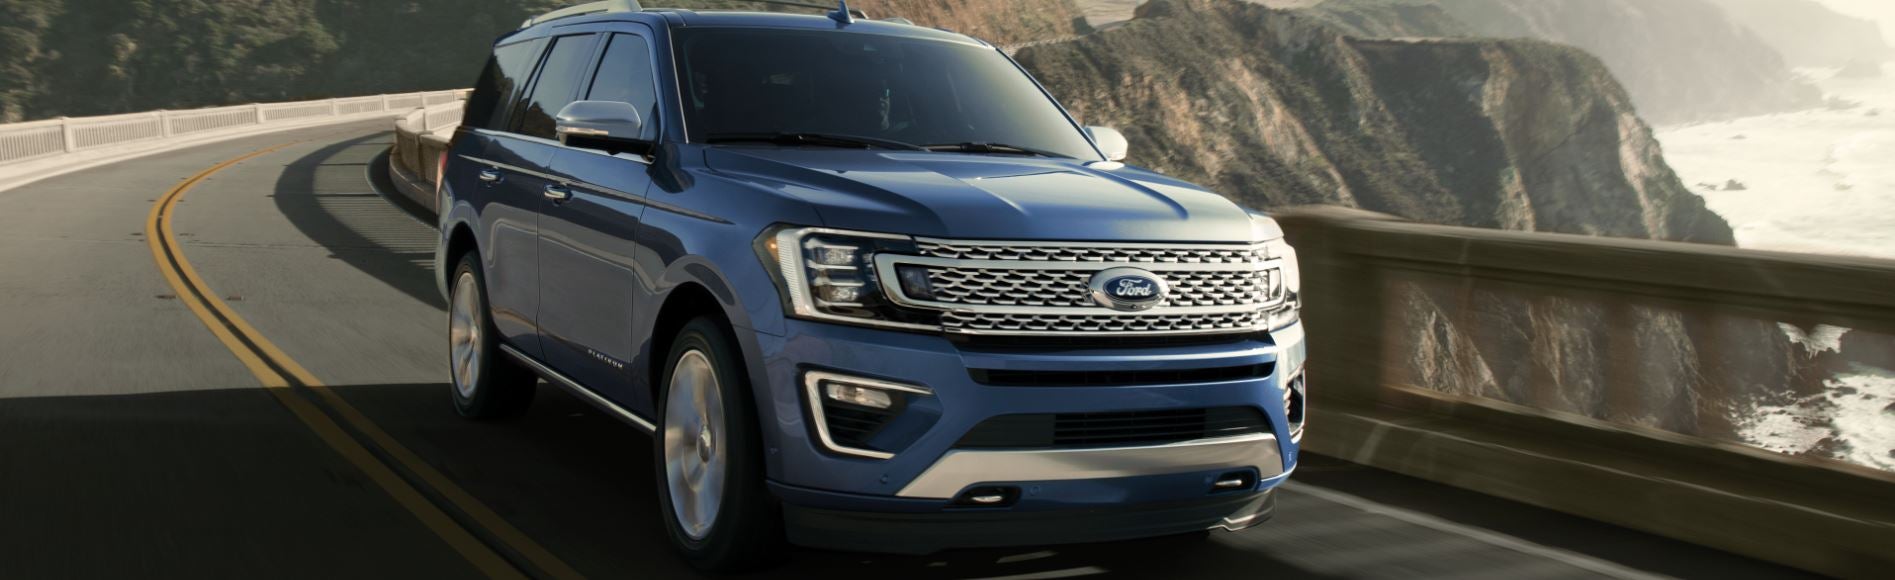 Test Drive a 2020 Ford Expedition in Dallas, GA at Hardy Family Ford